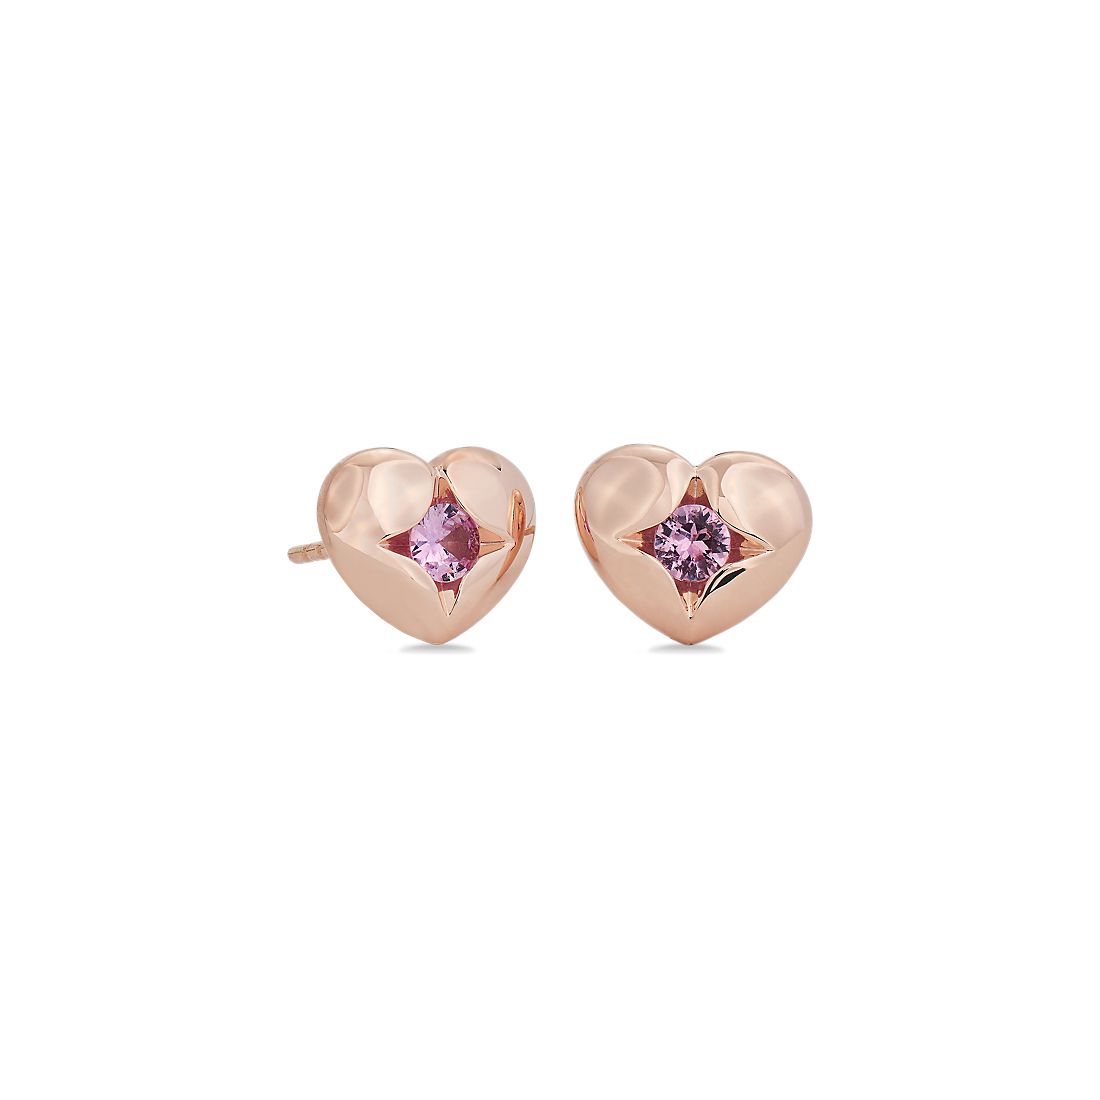 Pink Sapphire Inlay Heart Stud Earrings in 14k Rose Gold